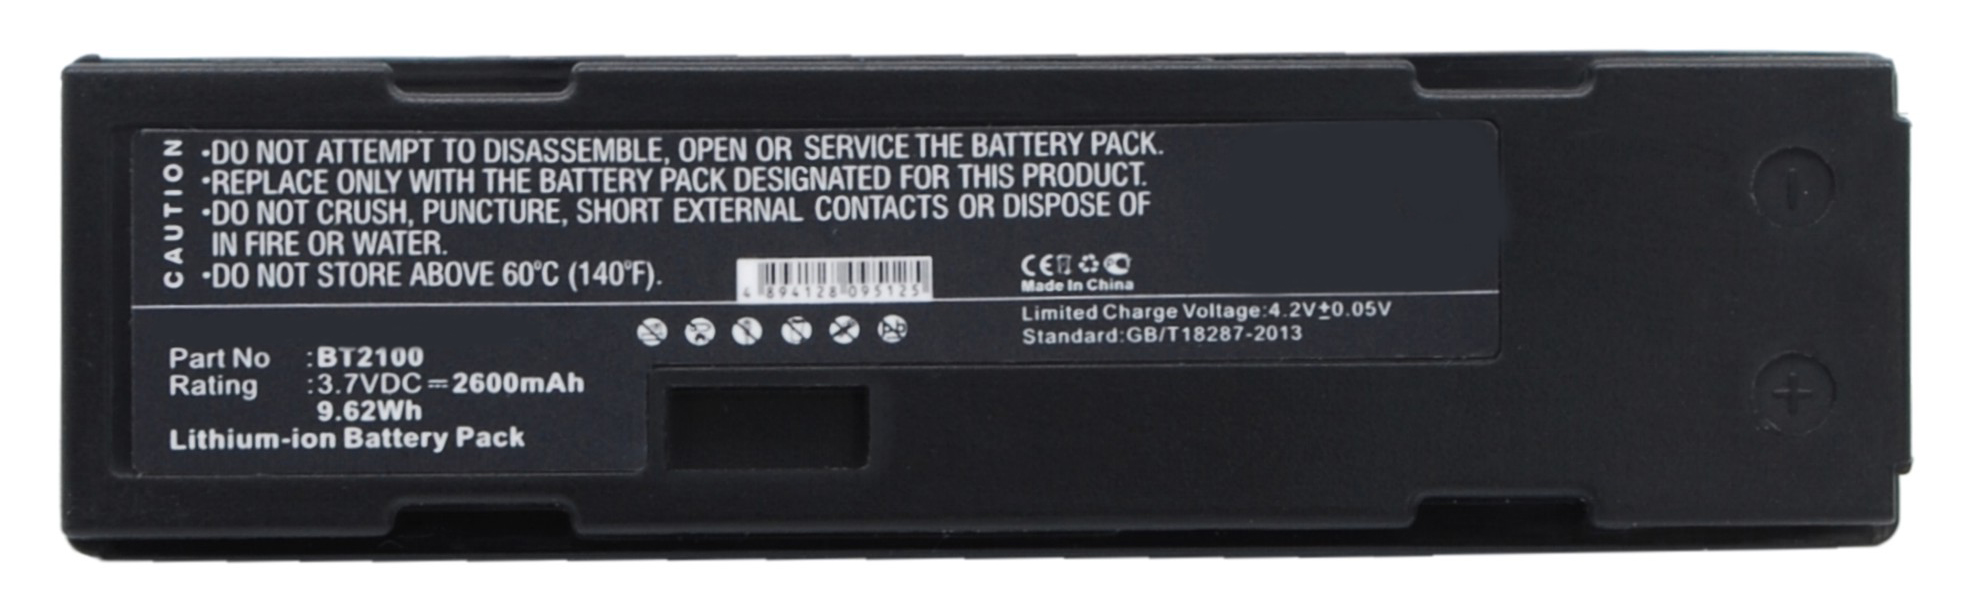 Batteries for CINOReplacement